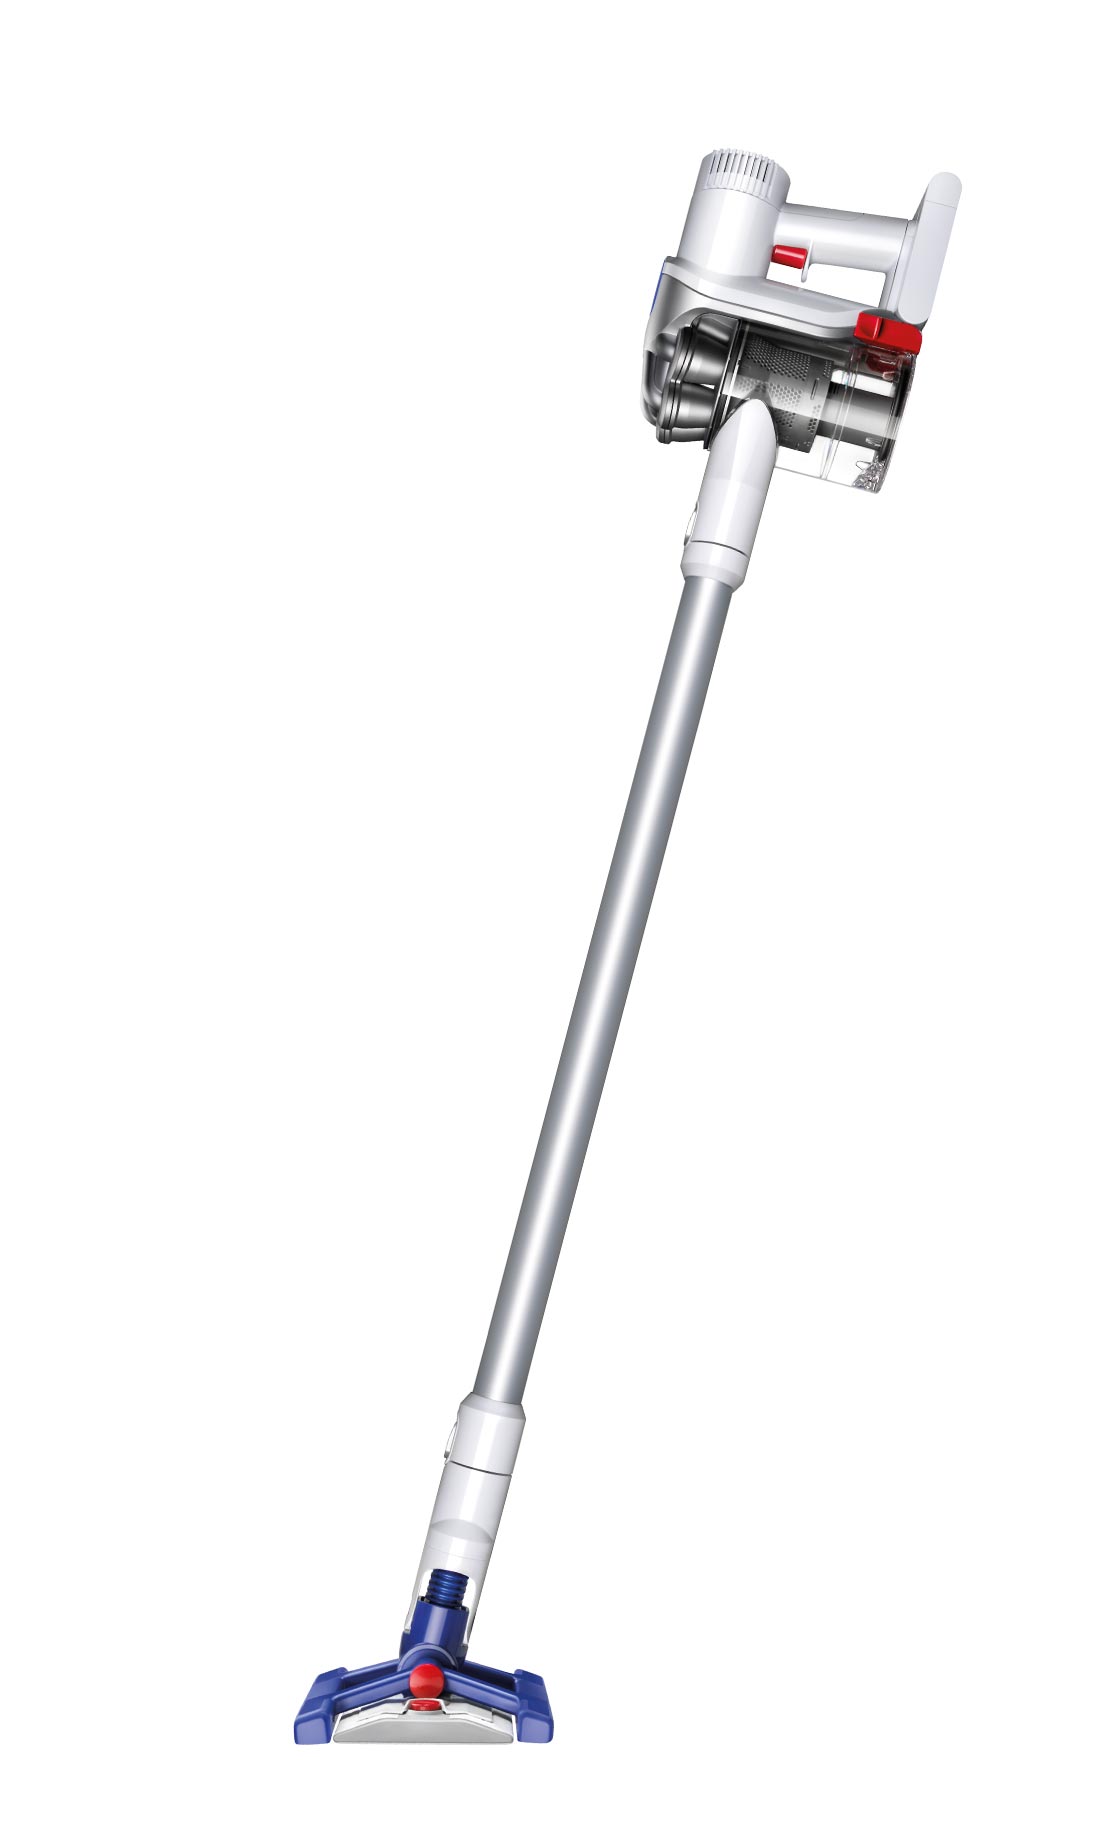 Image of the DC56 Dyson Hard Cordless Vacuum Cleaner